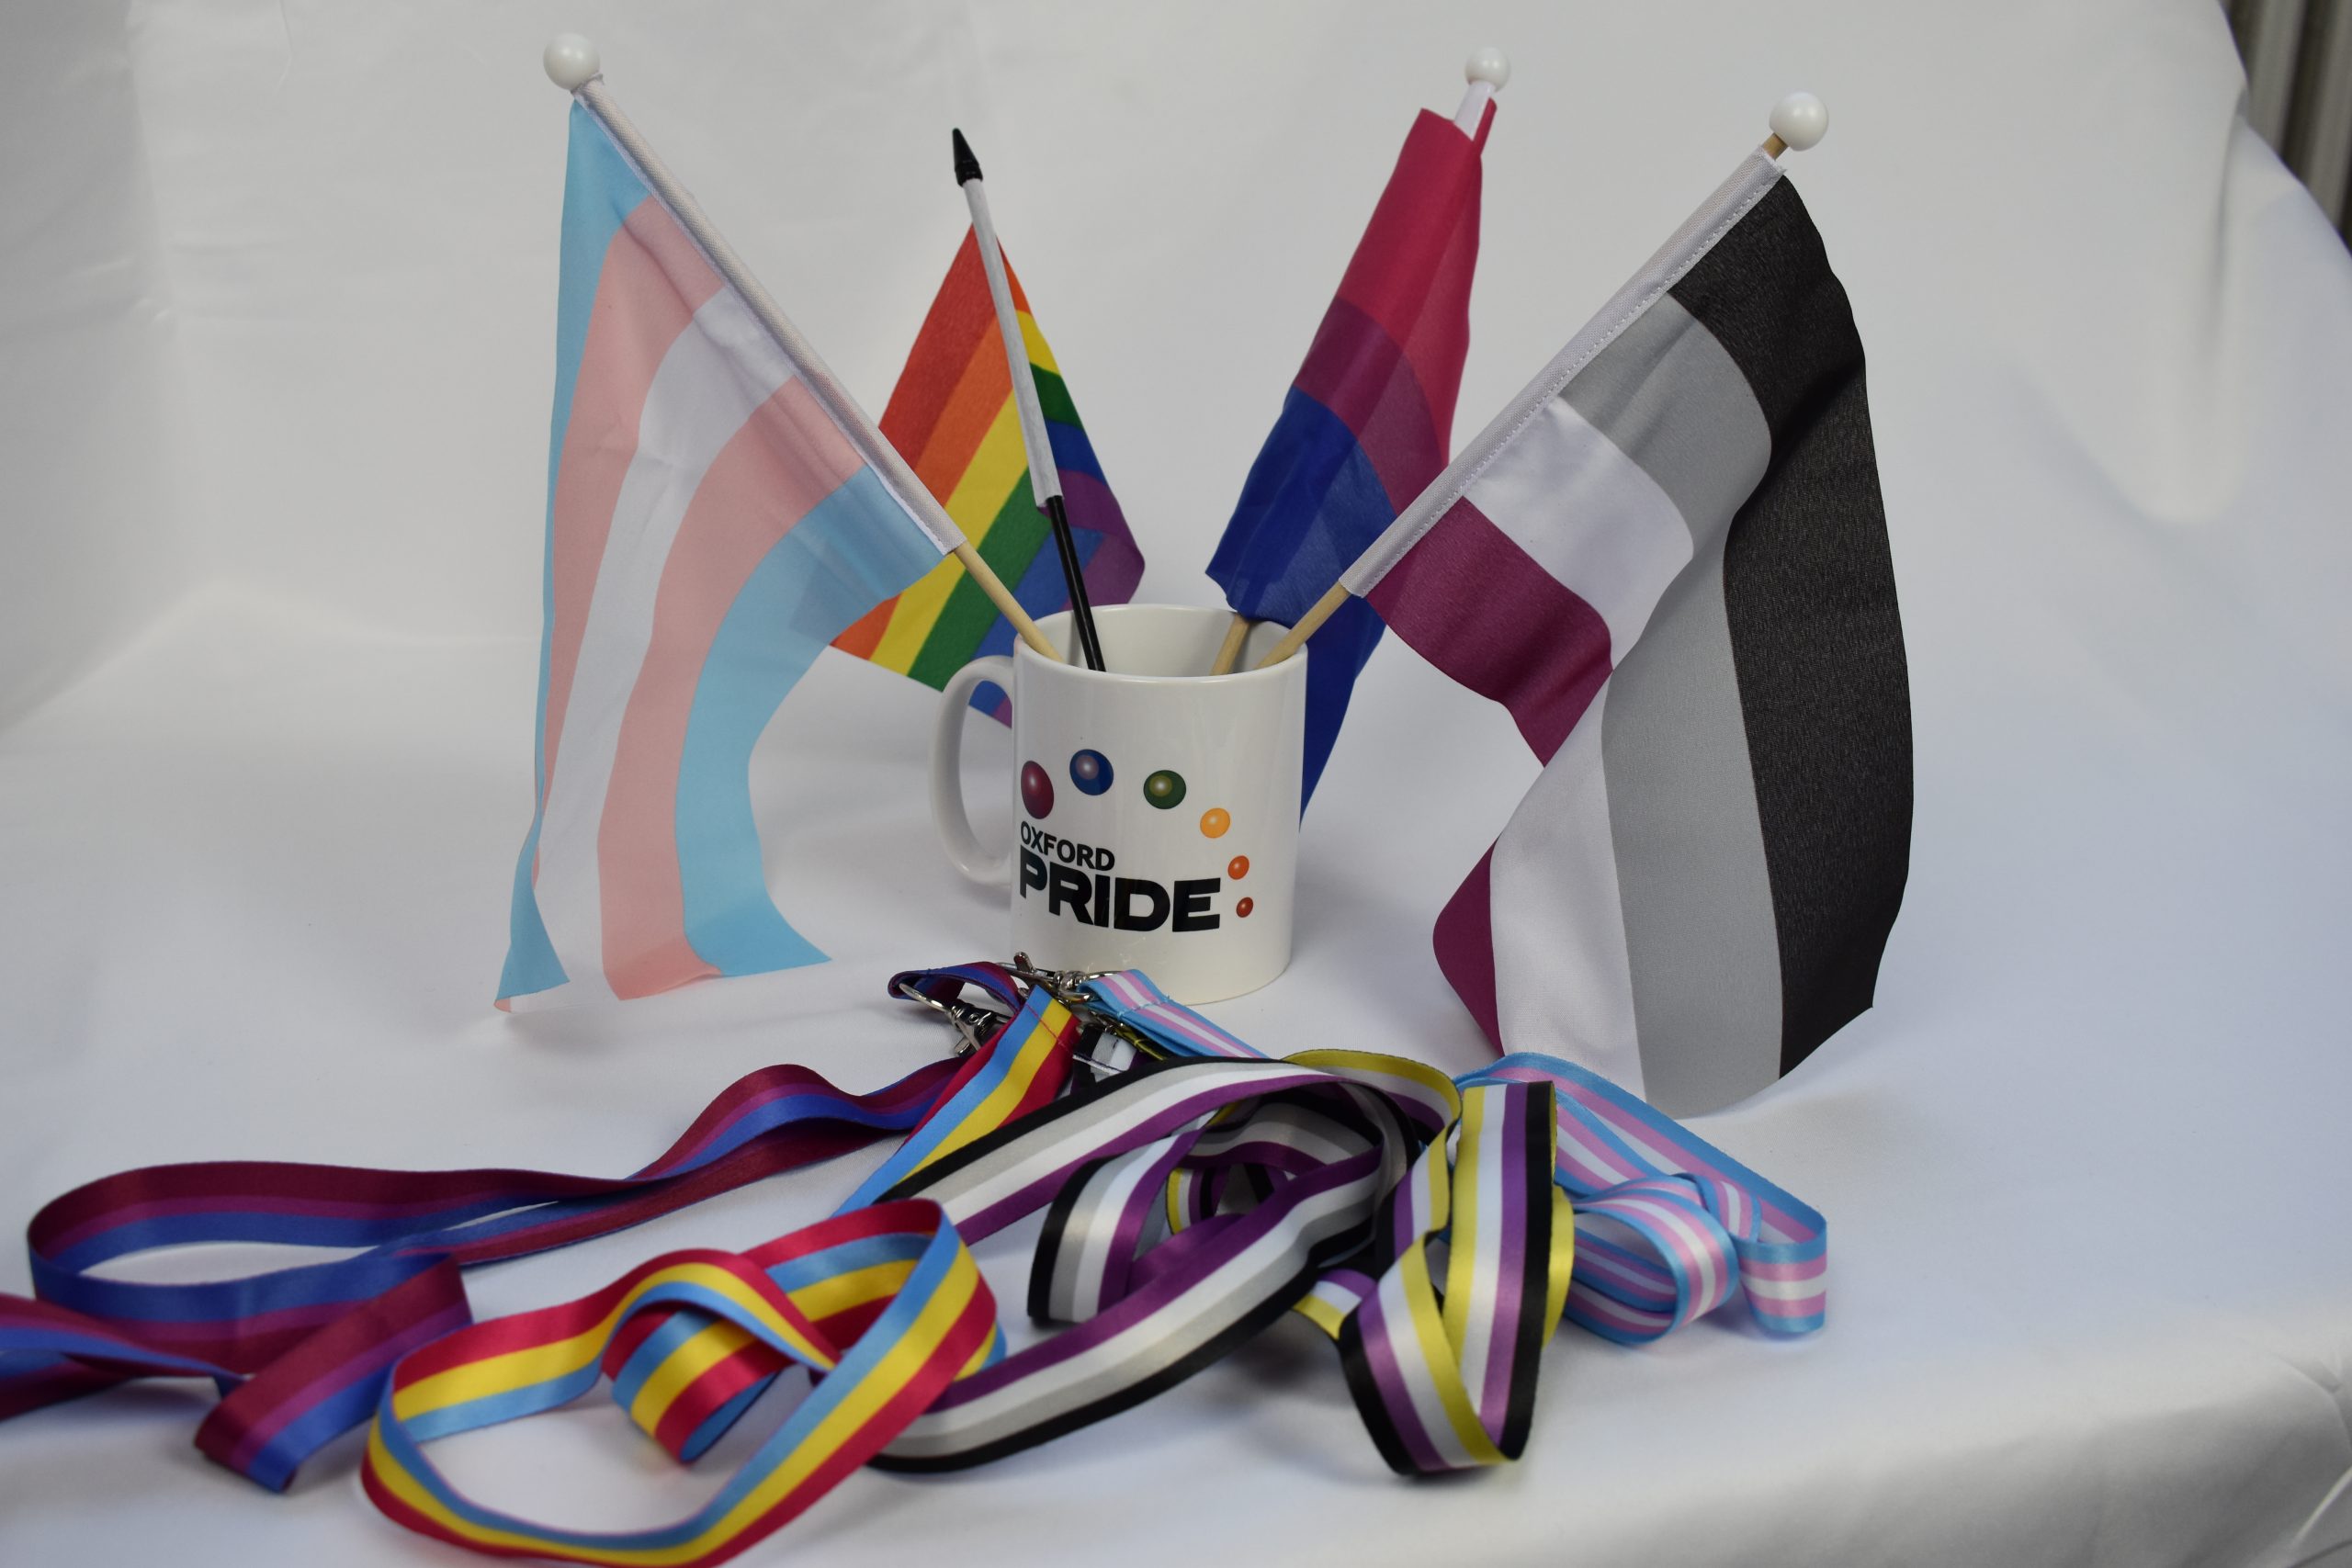 A selection of Oxford Pride memorabilia, including a mug with its logo, four mini flags (trans pride, original rainbow, bisexual pride and asexual pride flag) and a selection of lanyards in various LGBTQ+ flag colours